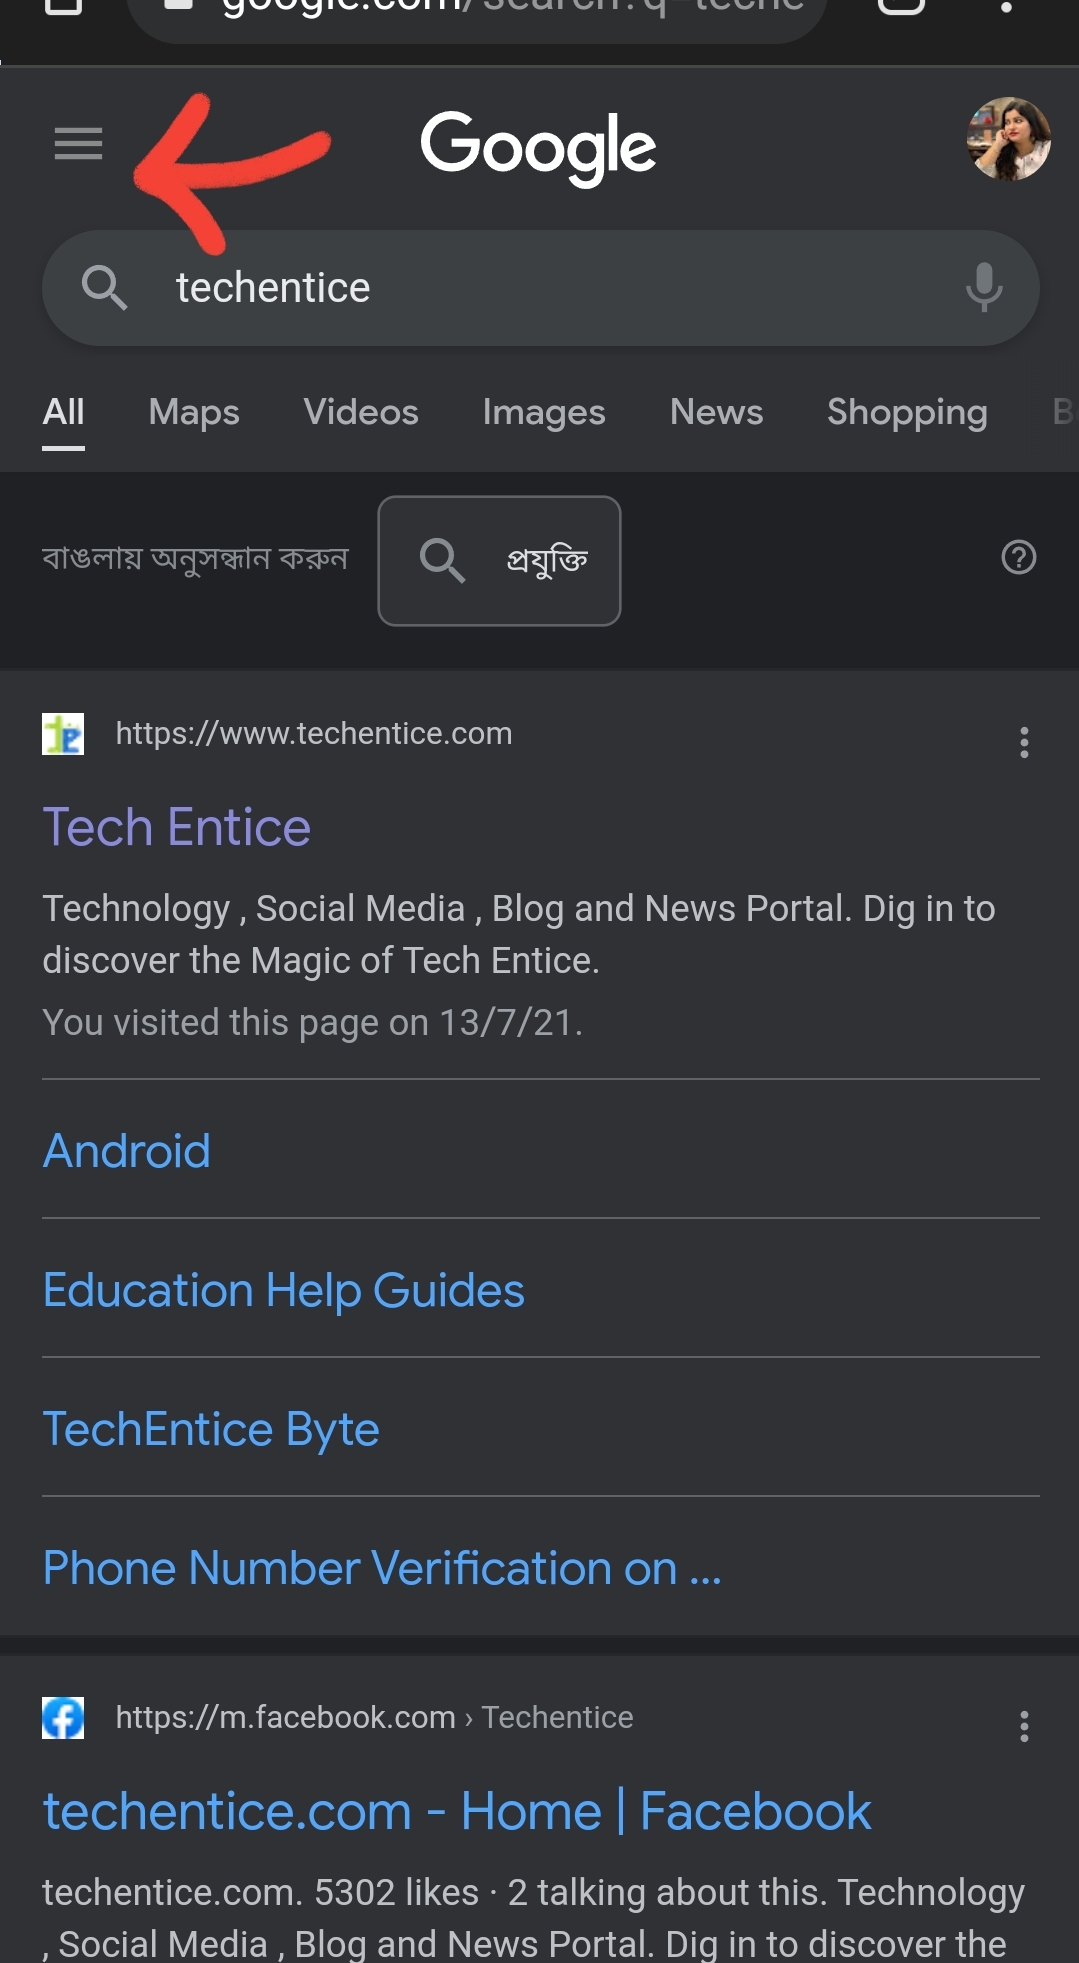 How To Turn On/Off Dark Mode In Google Search (Android)?